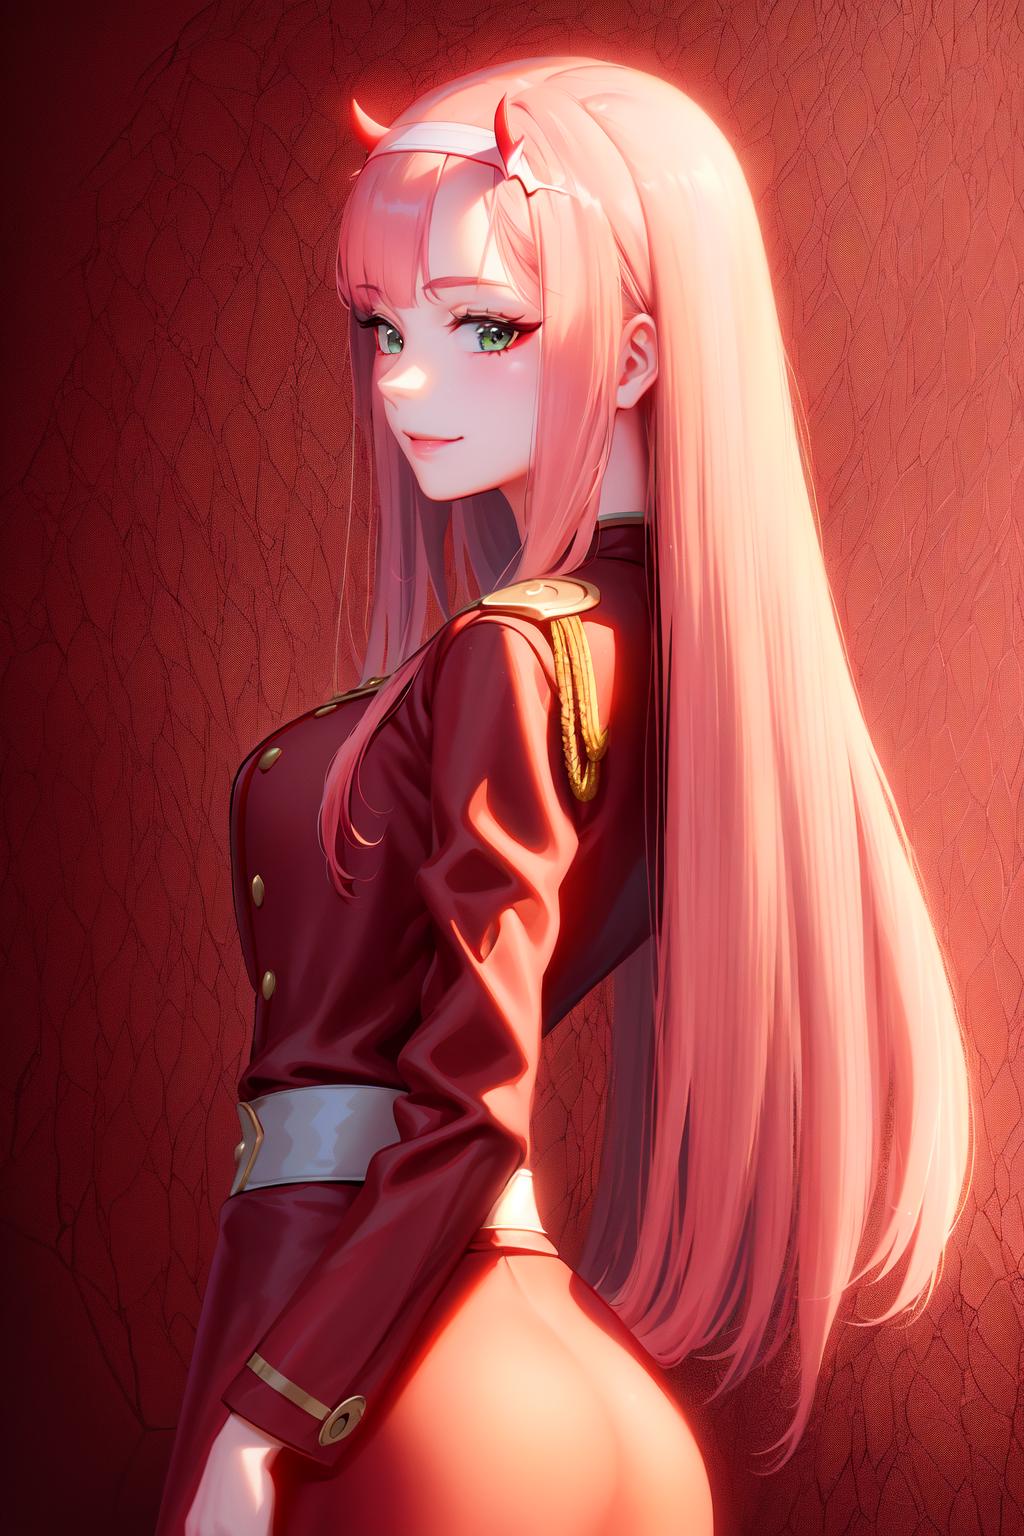 Anime Portrait of a Woman with Pink Hair, Red Jacket, and White Undergarment